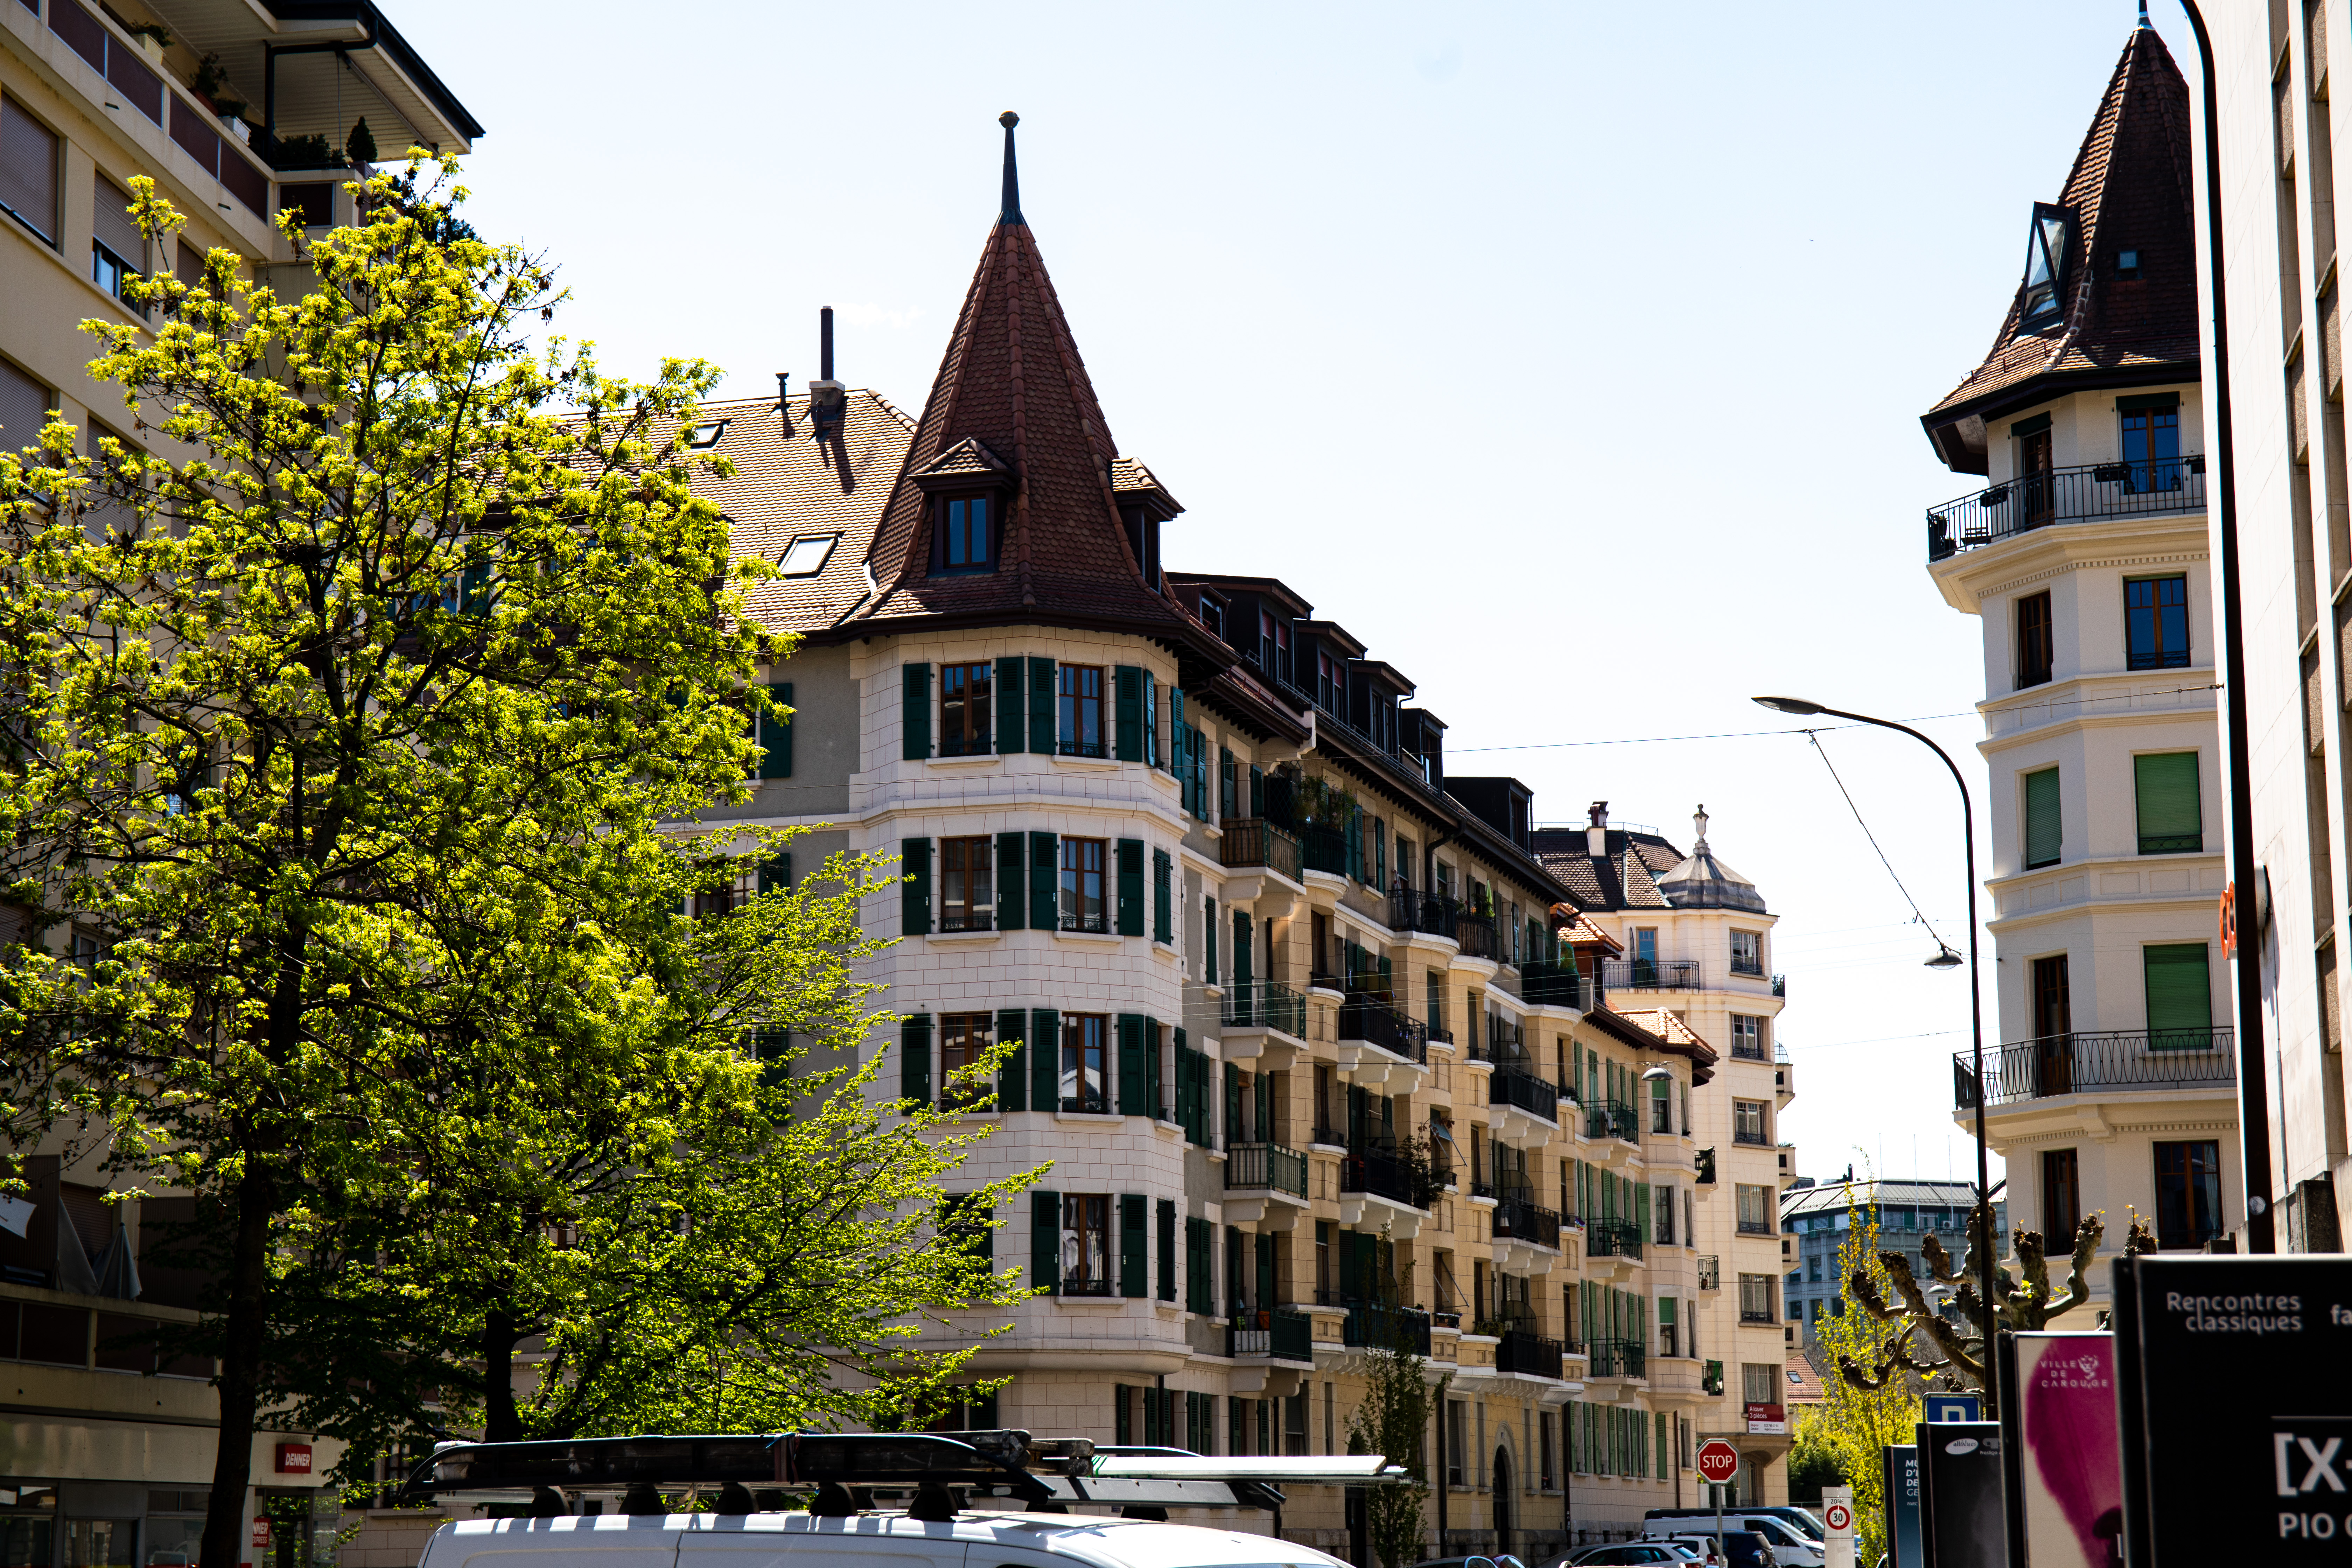 Photography Outdoors Trees Urban Building Architecture Road France 6720x4480